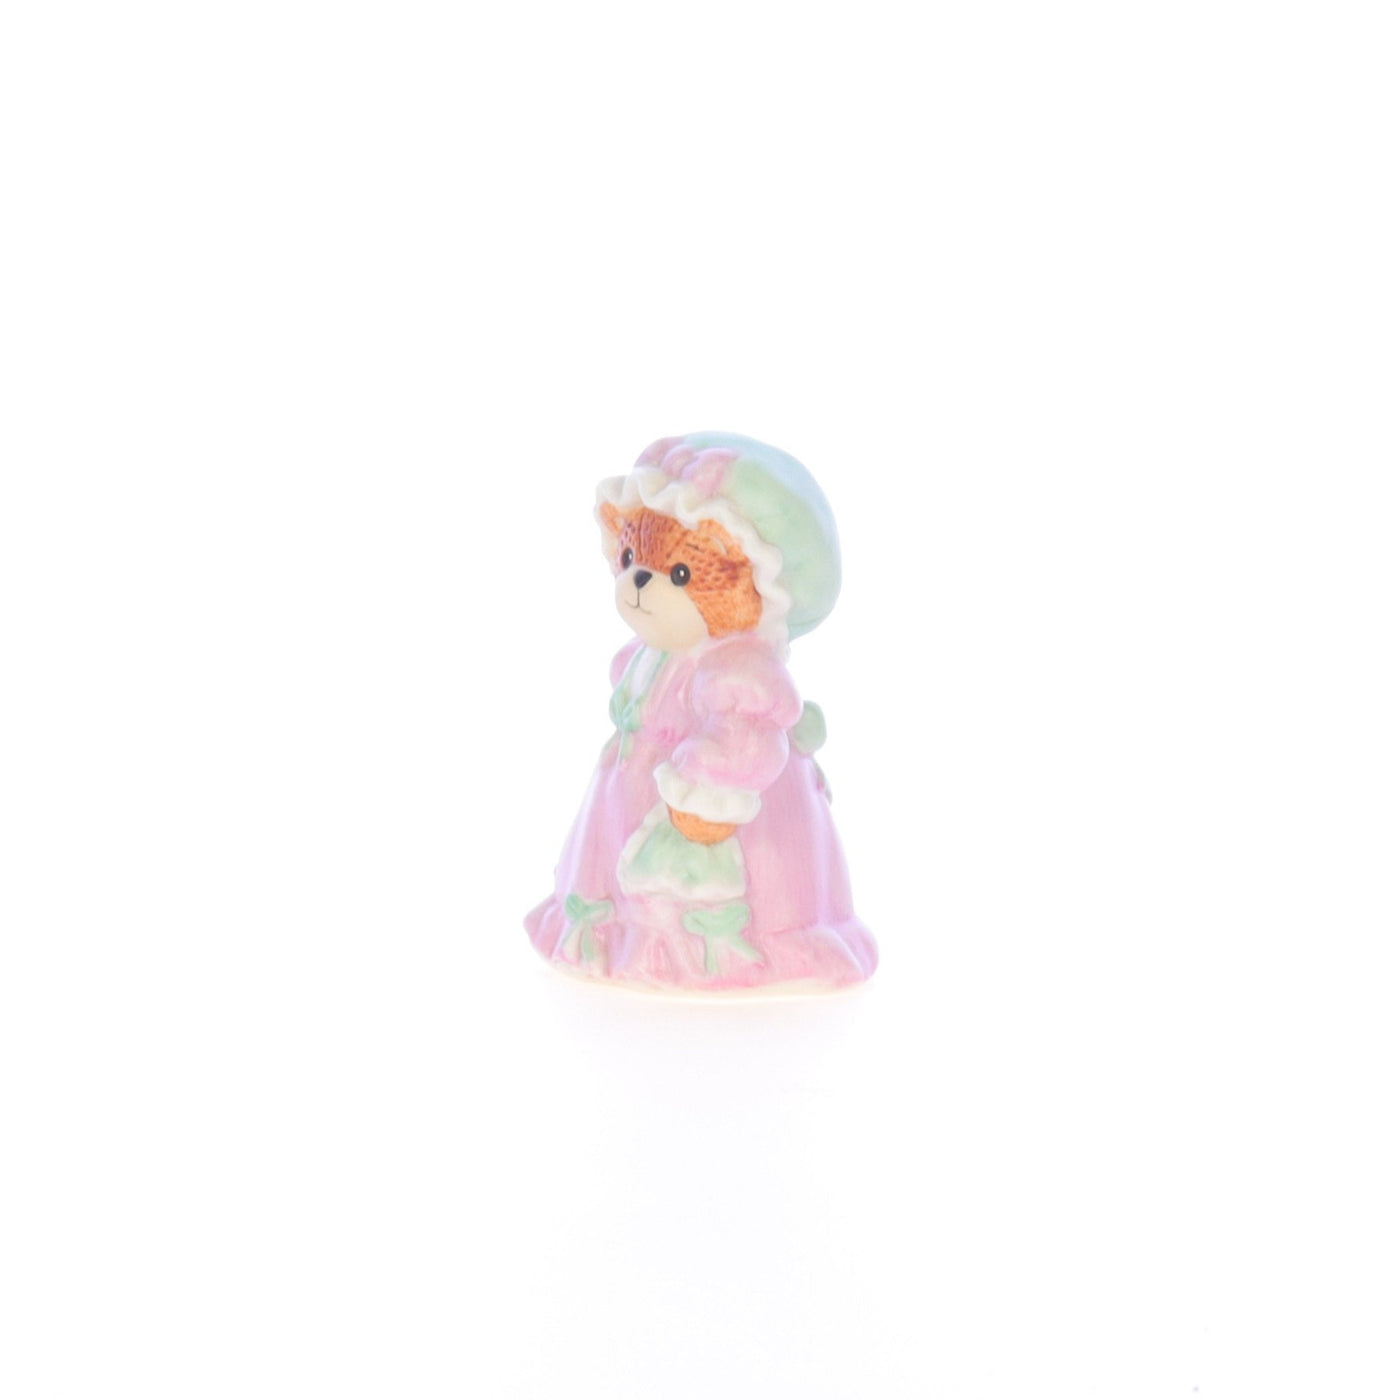 Lucy_And_Me_by_Lucy_Atwell_Porcelain_Figurine_Bear_with_Bonnet_Lucy_Unknown_006_02